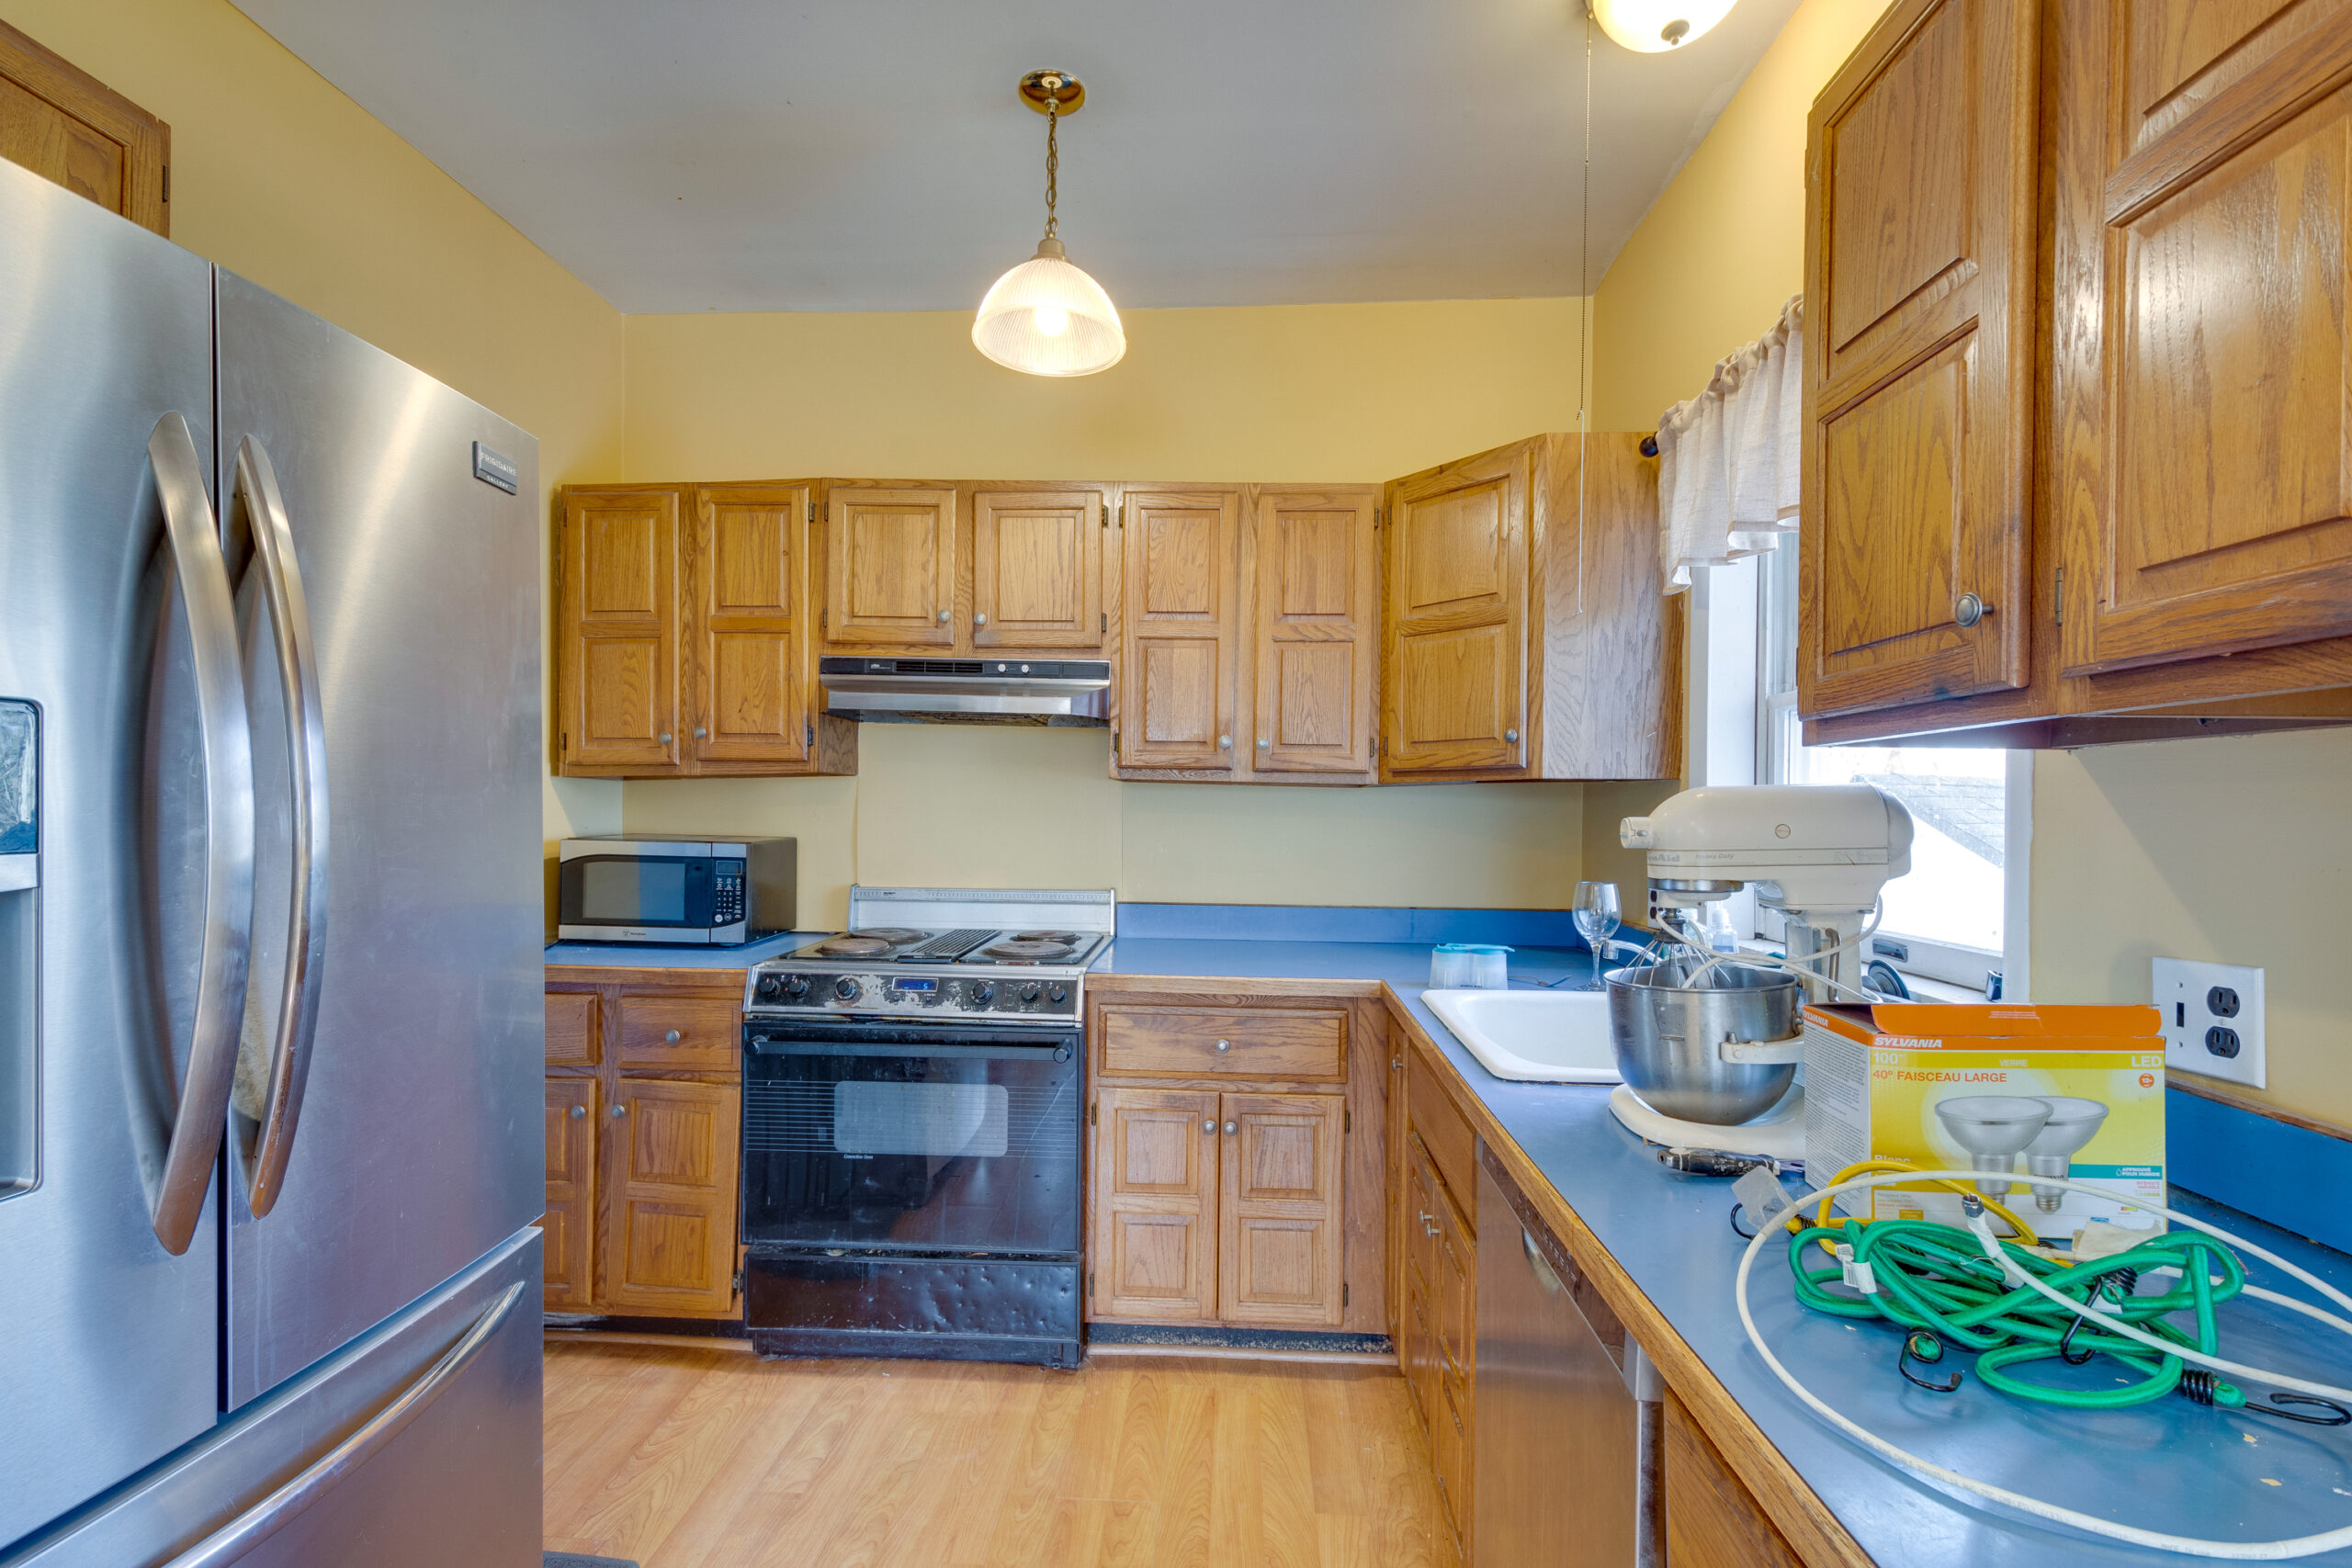 mage of a kitchen in a vintage New England home before renovation. This view shows a large hole in the yellow wall, old wooden cabinets, and blue countertops. The room also has a ceiling fan, outdated appliances, and a mix of old flooring, indicating significant wear and tear.